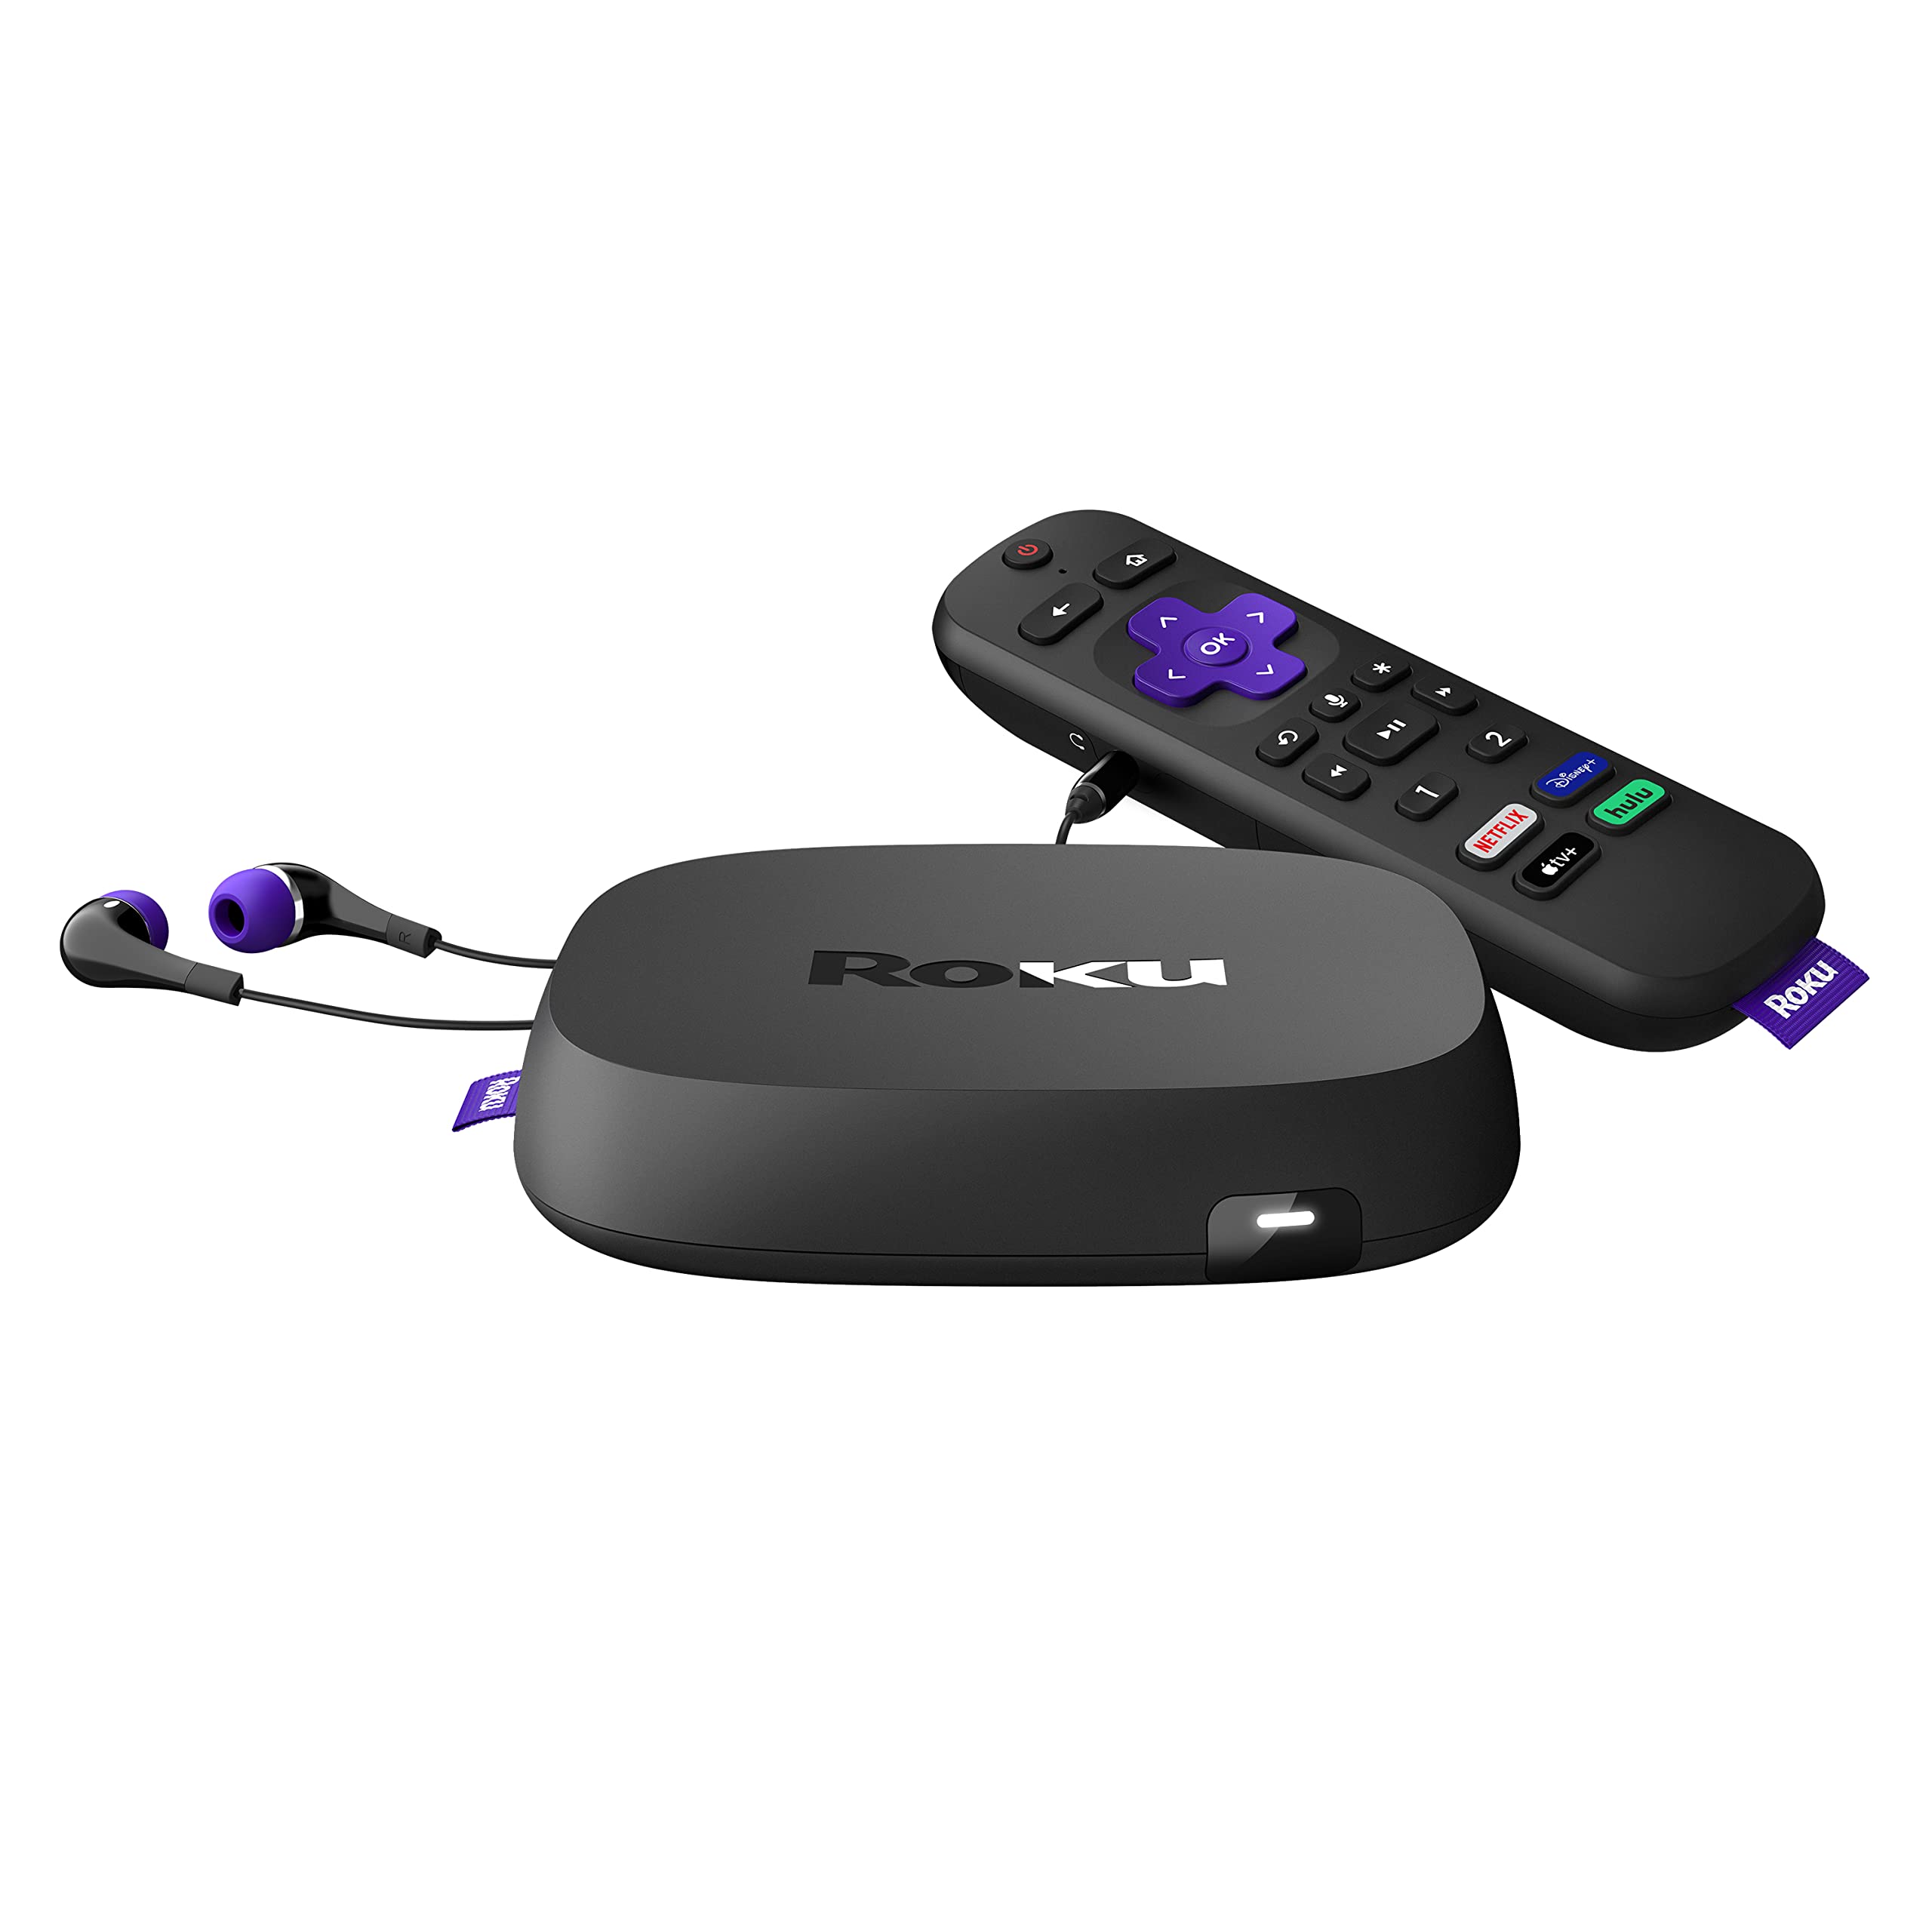 Roku Ultra | Streaming Device HD/4K/HDR/Dolby Vision with Dolby Atmos, Bluetooth Streaming, and Roku Voice Remote with Headphone Jack and Personal Shortcuts, includes Premium HDMI� Cable